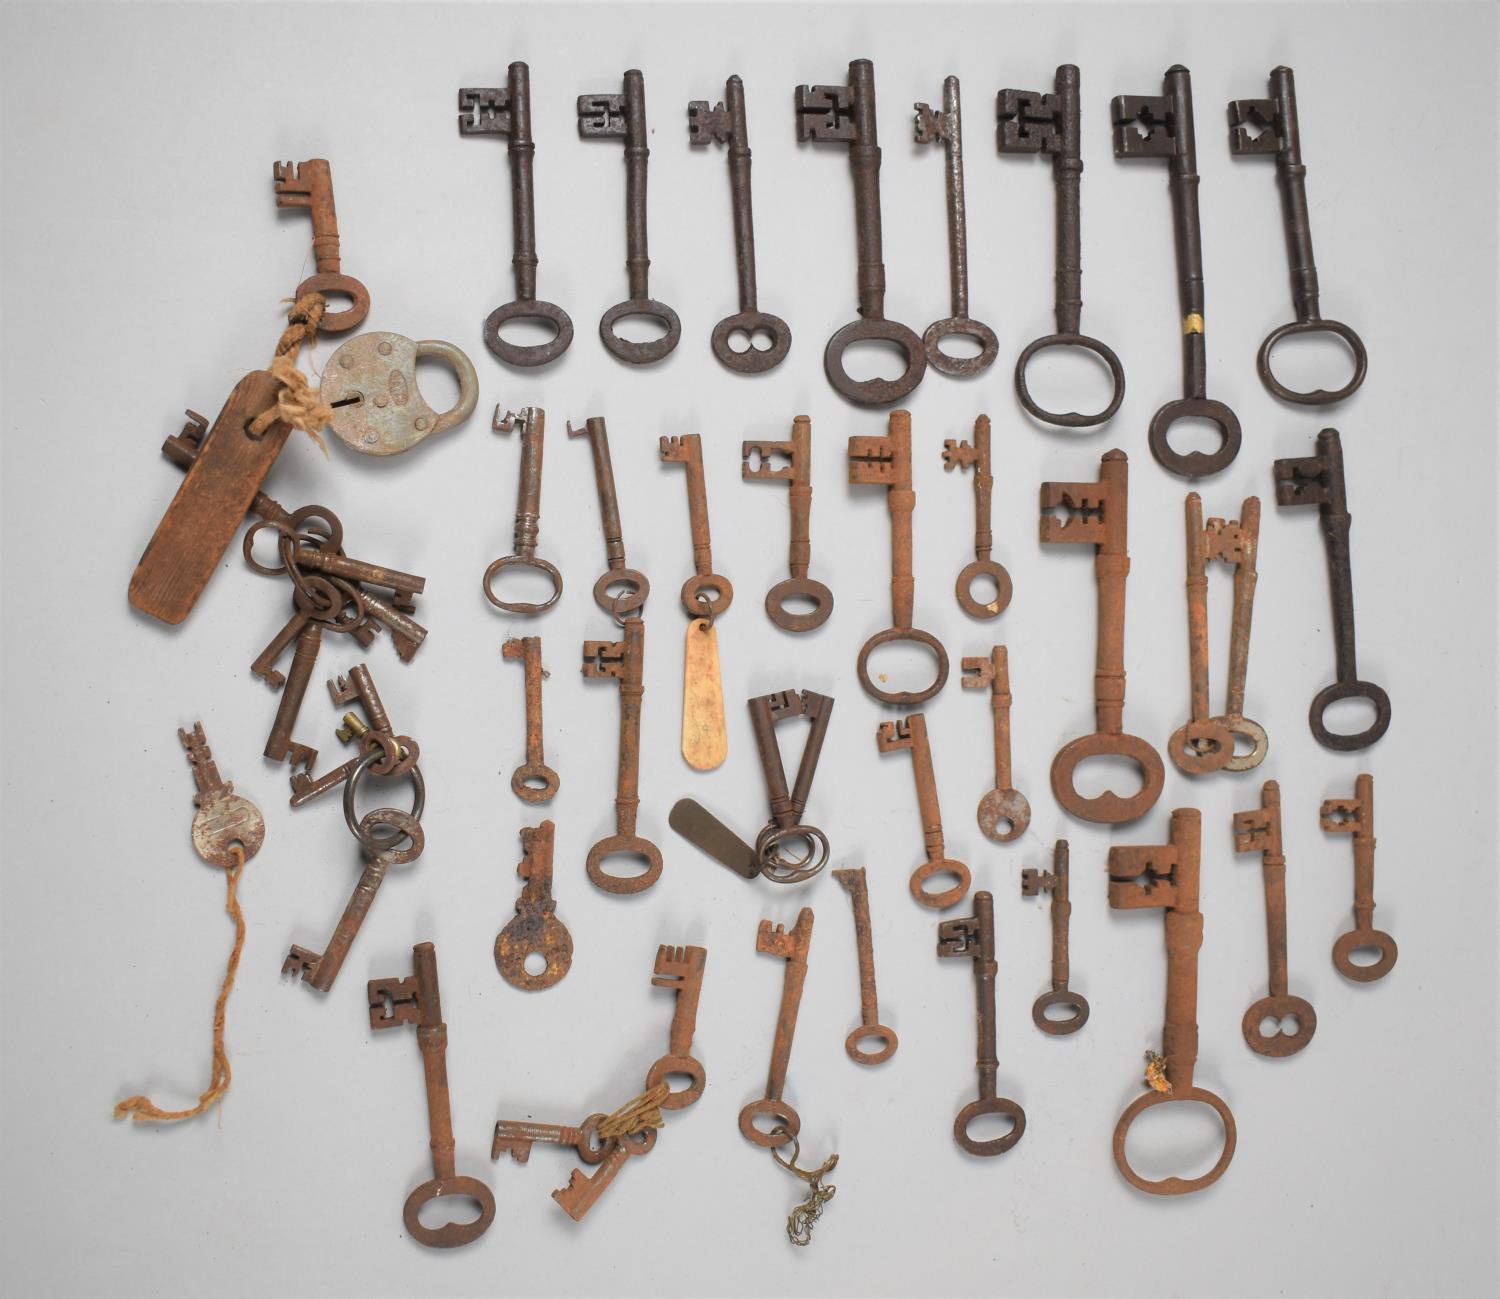 A Collection of 19th Century and Earlier Door Keys, Somewhat Rusted